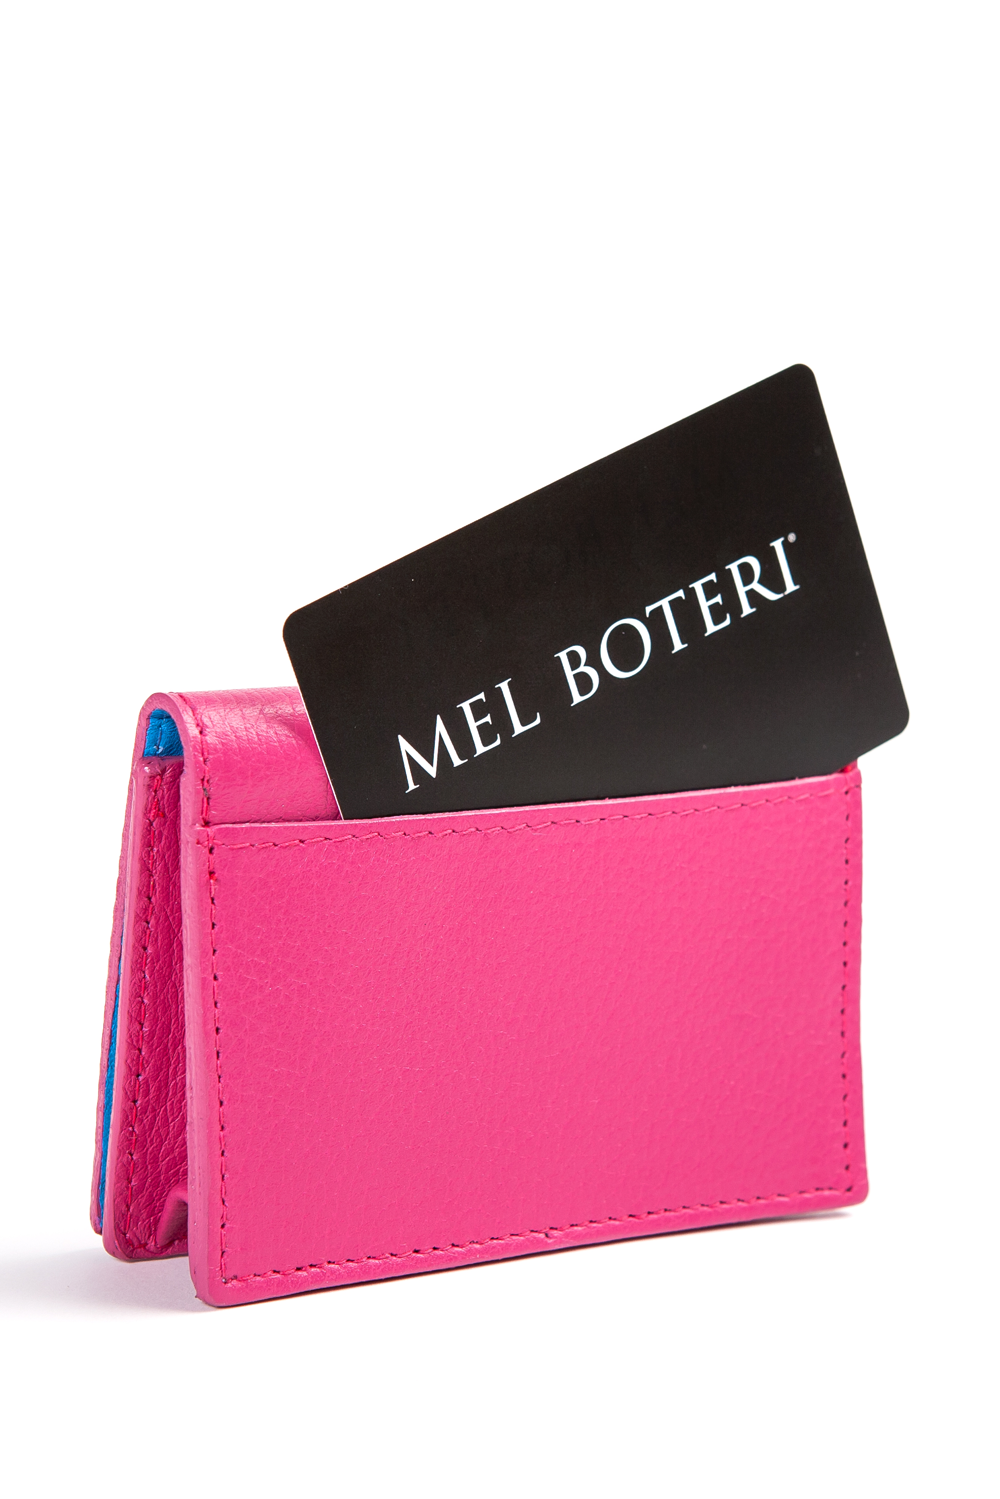 Leather Card Holder Wallet | Mel Boteri Corporate Gifts And Premiums